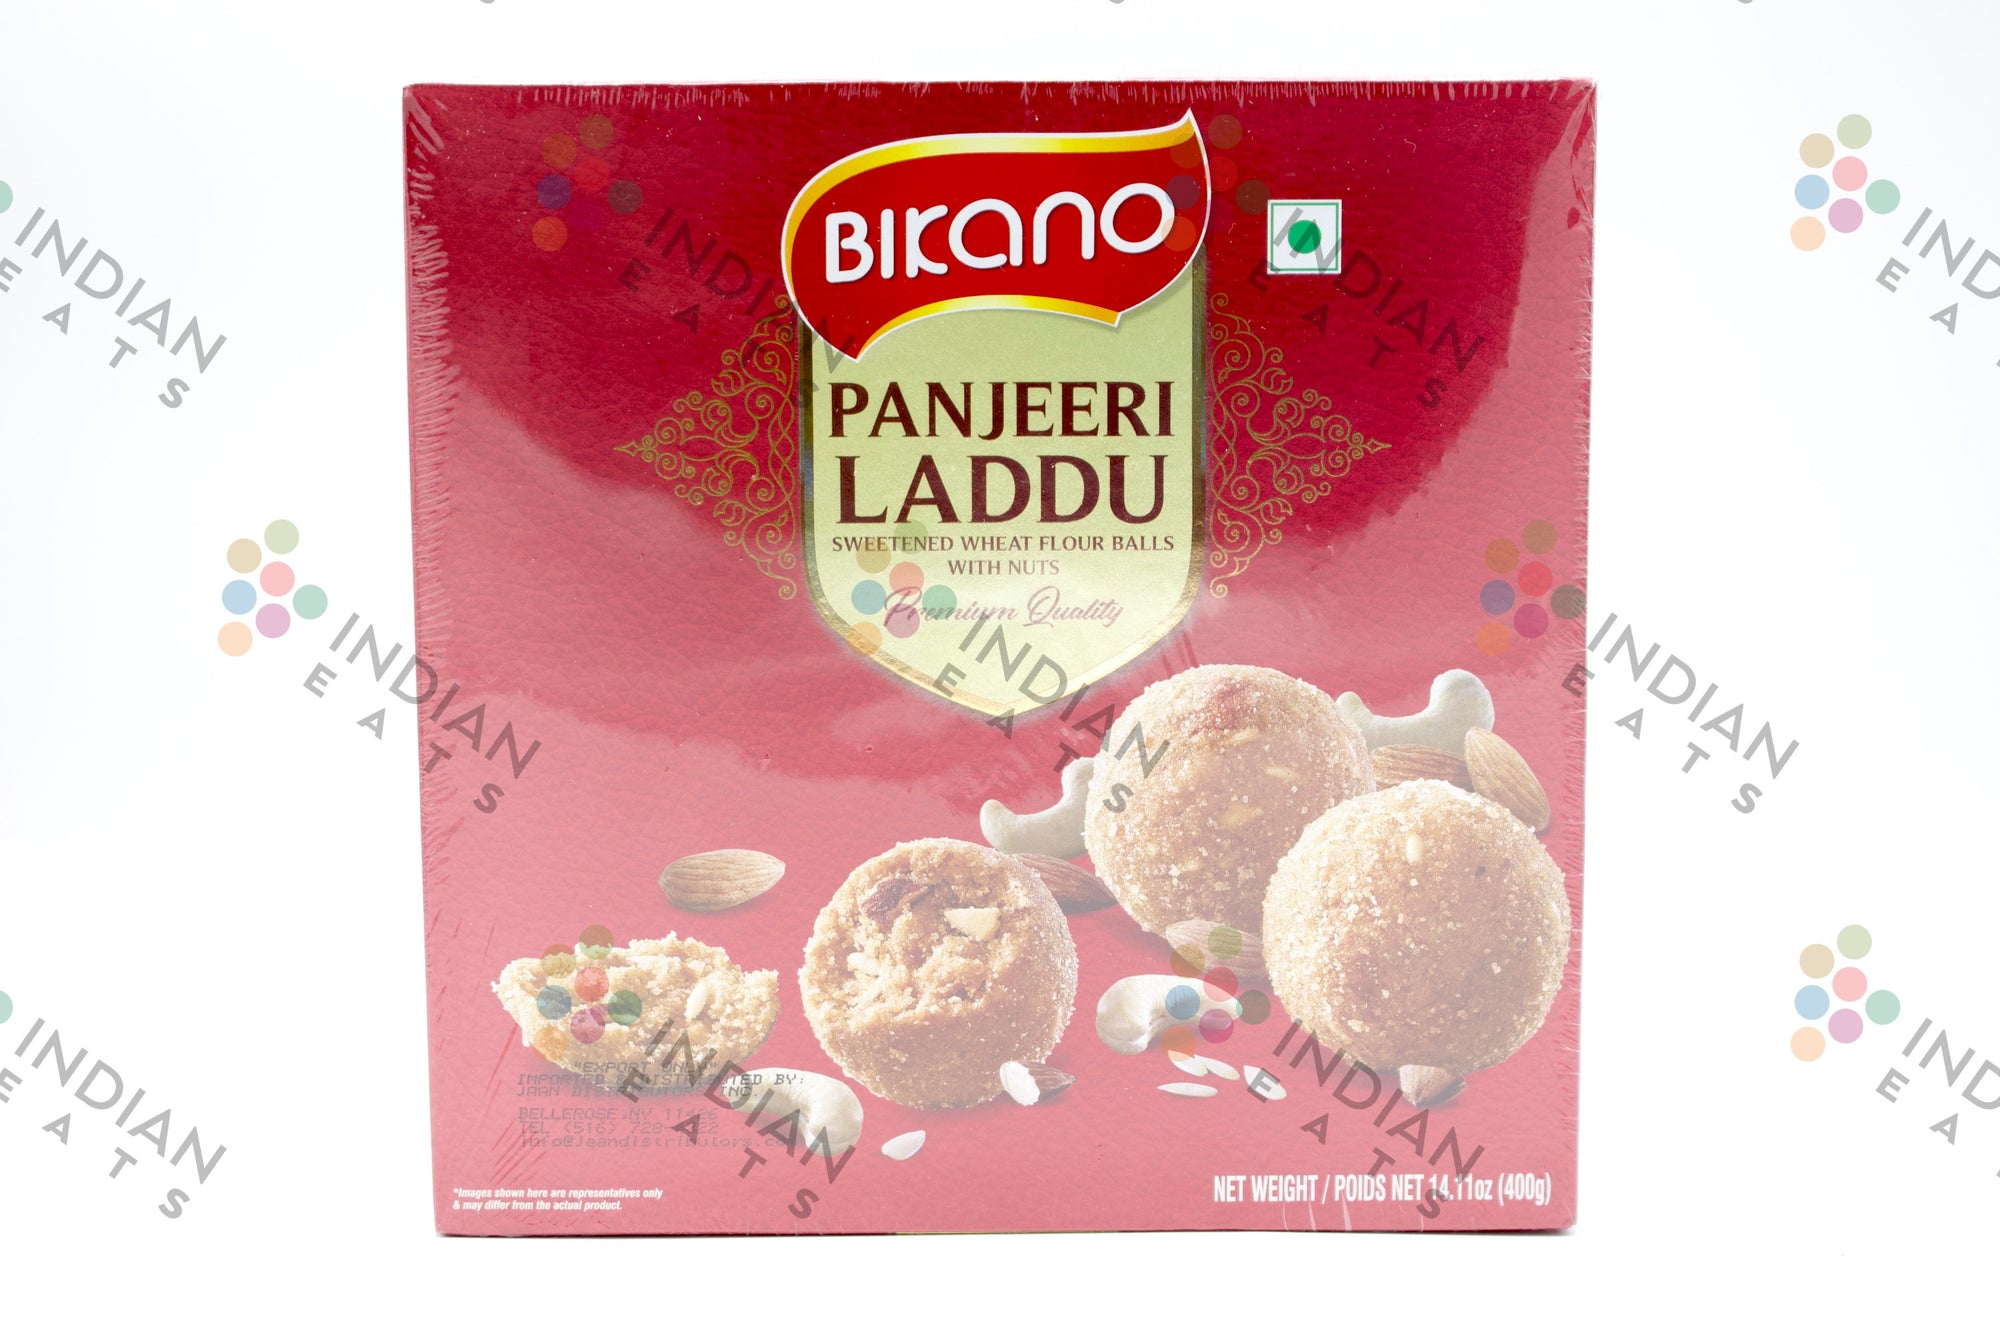 Bikano - Be your own chef and make flavourful idli with Bikano's  Ready-to-eat! #Bikano #BarsoSeBikano #bikanoworld #bikanoIndia #readytoeat  #readymade #motherlyfood #homemade #homefood #quickrecipes #quickfood  #hungerkiller #hungerstrike #indiantaste ...